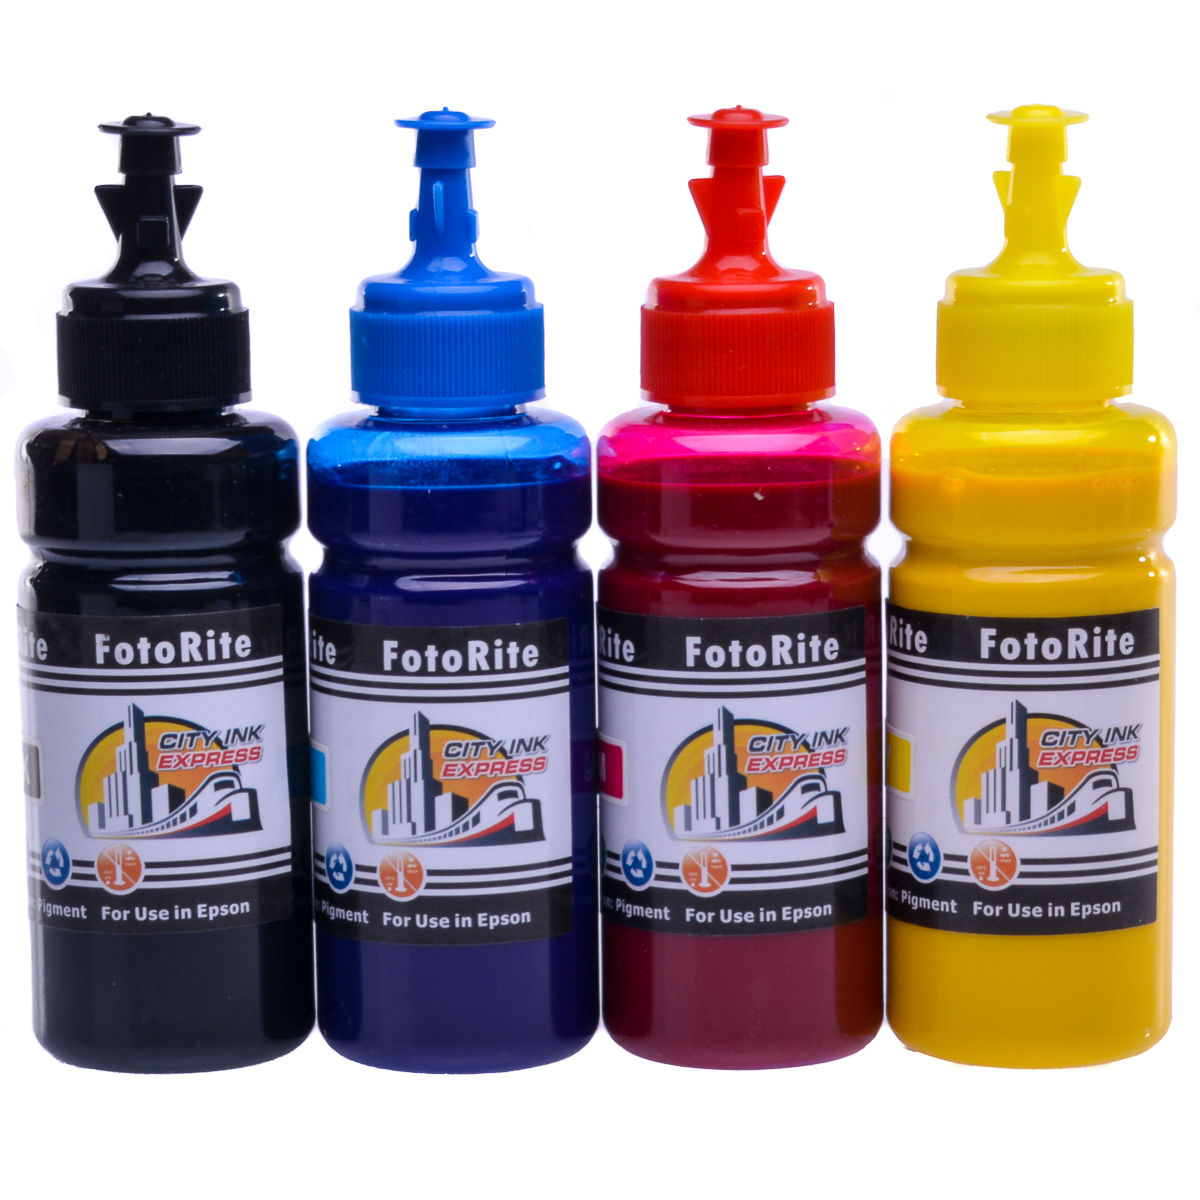 Cheap Multipack pigment ink refill replaces Epson Stylus DX4050